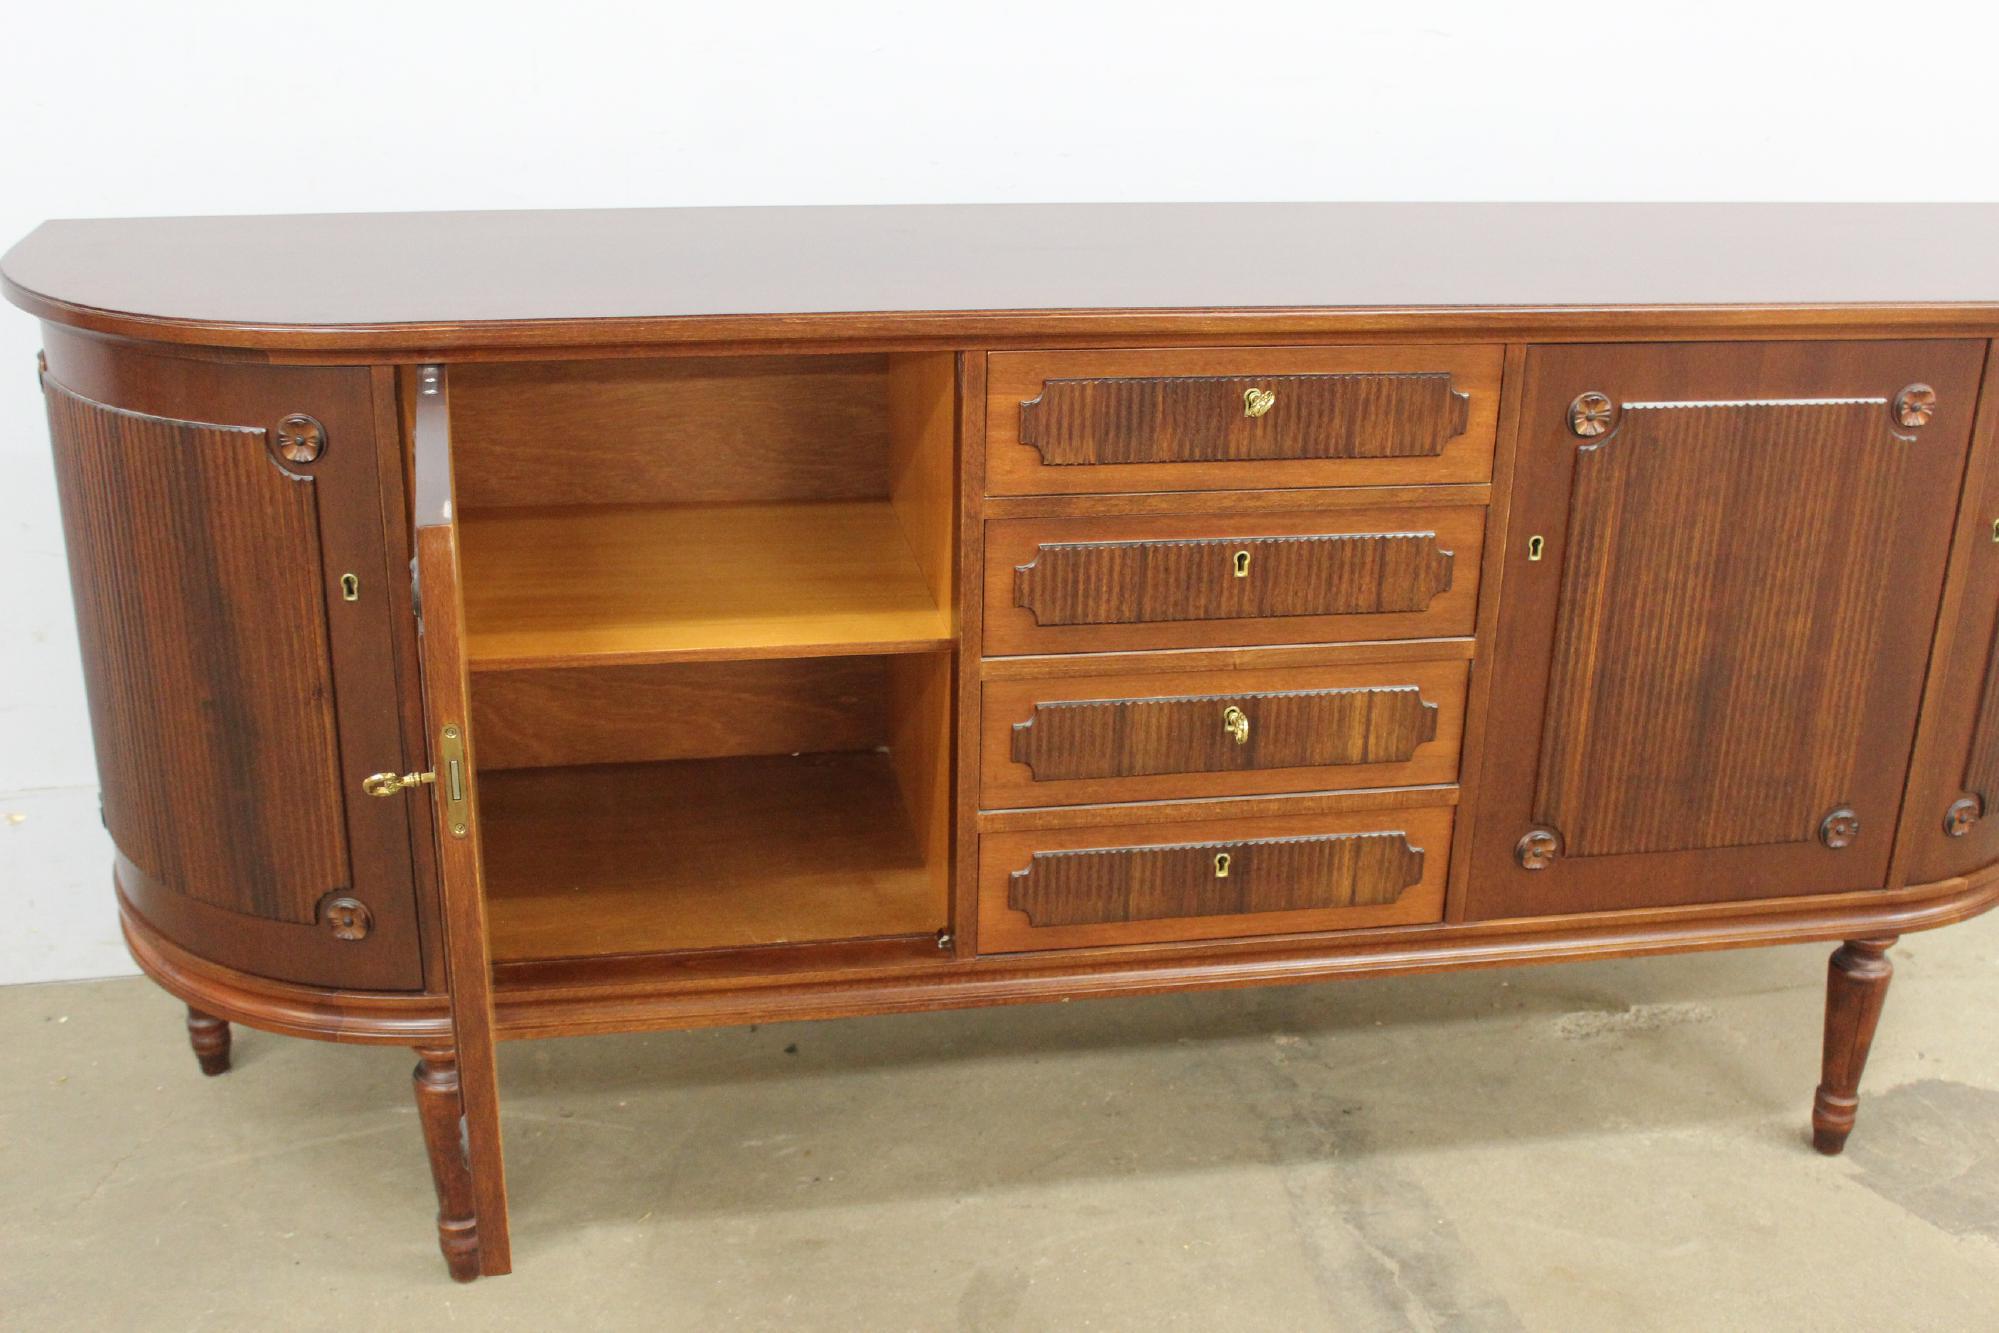 Mahogany Stained Swedish Gustavian Style Sideboard